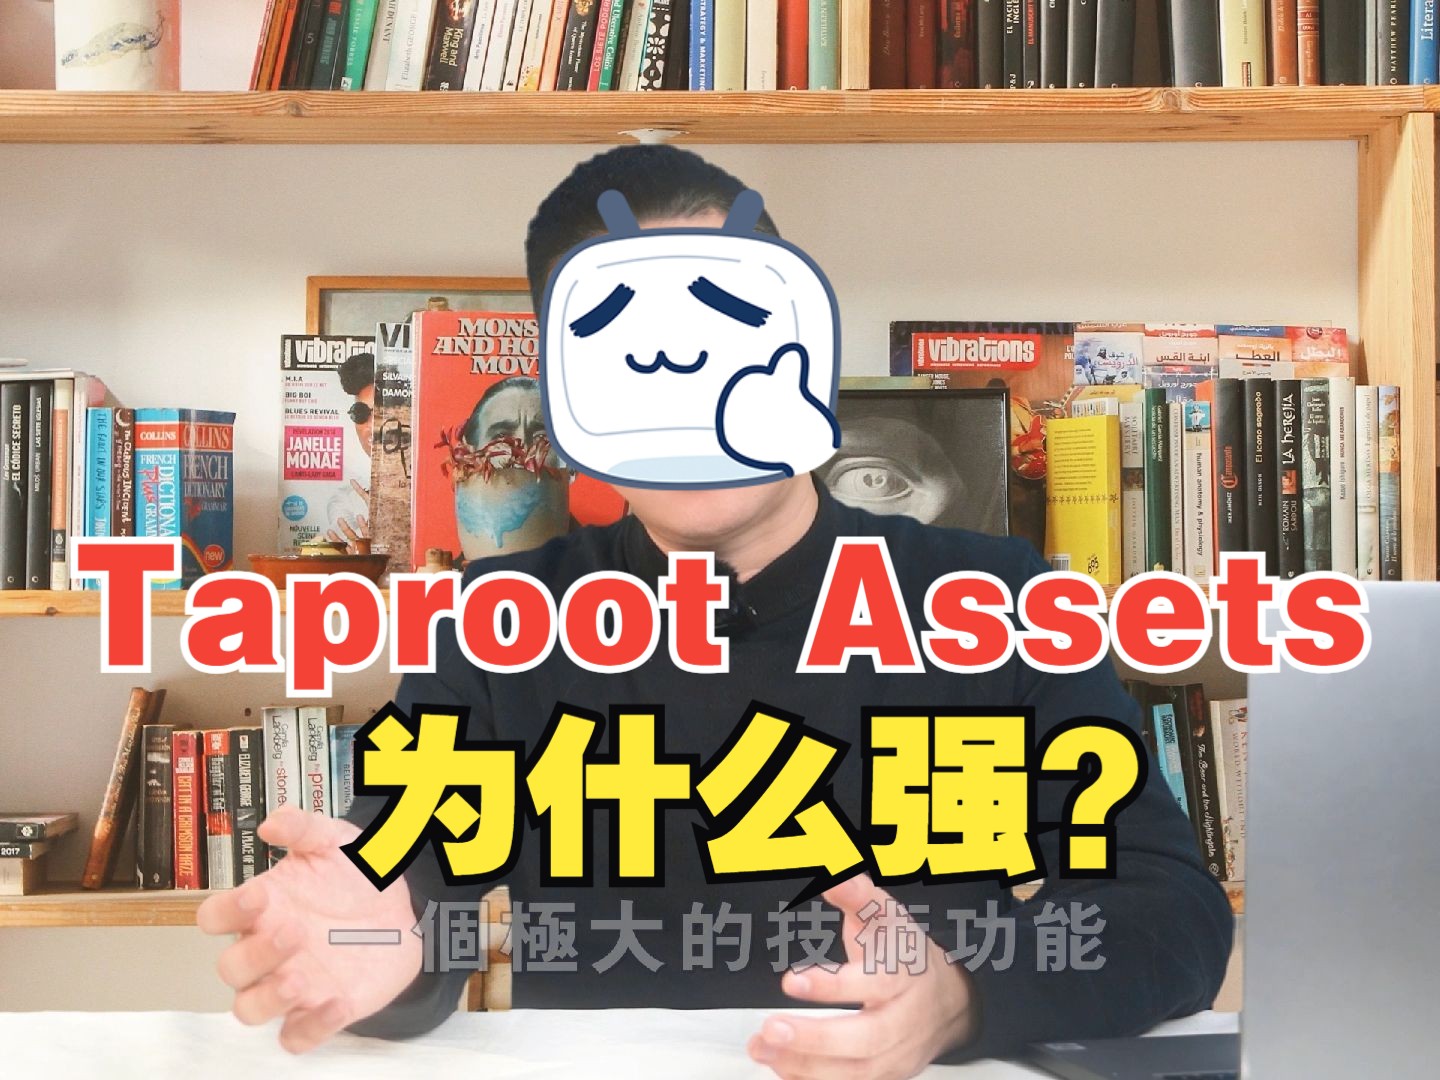 Taproot Assets为什么强？